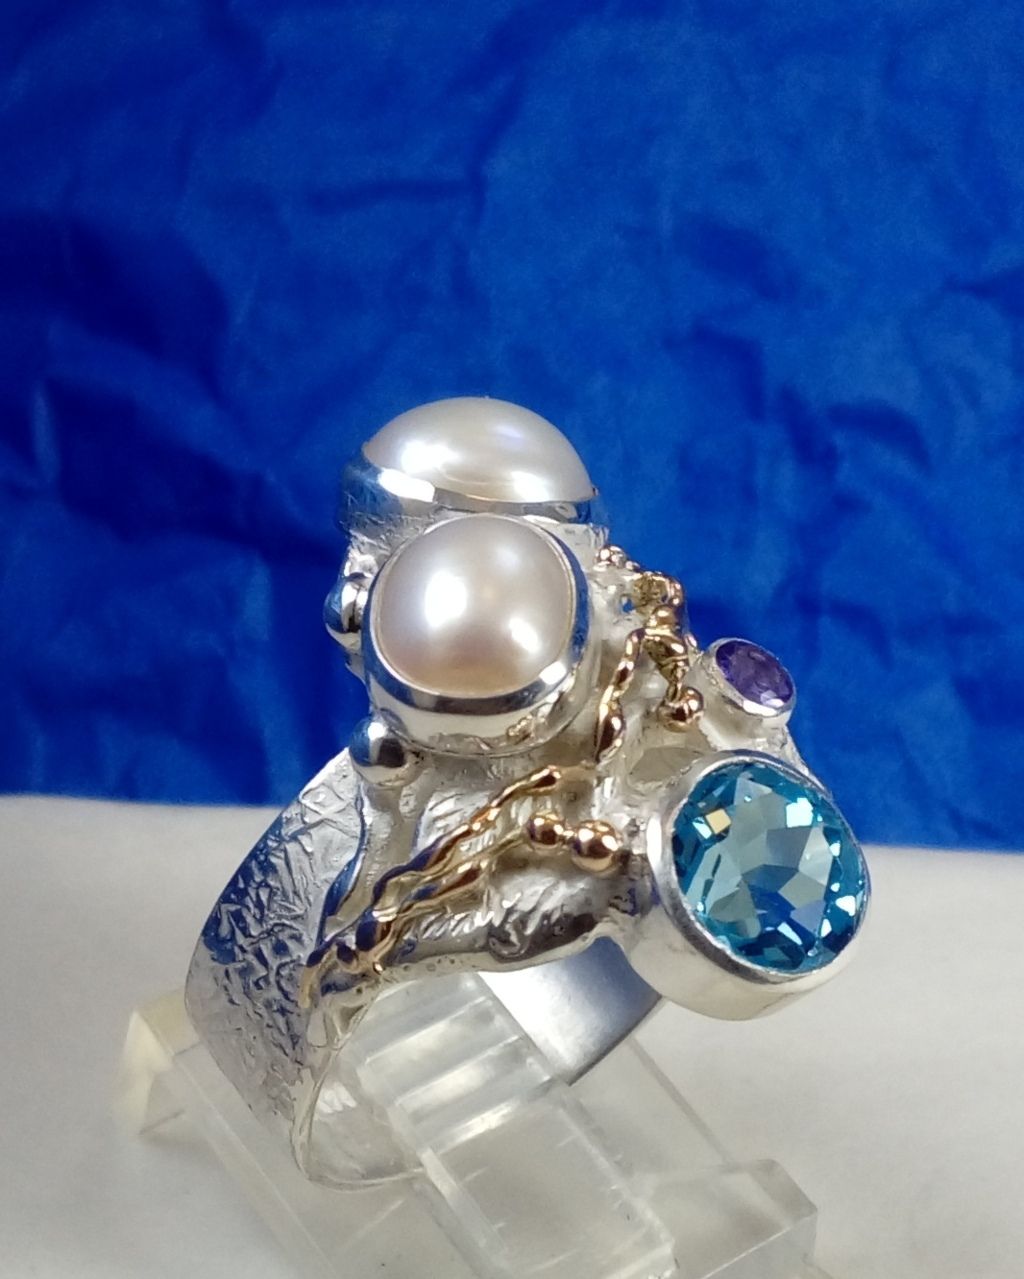 new gregory pyra piro art jewelry, specific niche artisan jewelry, Gregory Pyra Piro ring 7320, jewelry with amethyst and blue topaz together, rings for women with topaz and pearl together, rings for women with amethyst and pearl together,jewellery artist in Europe, designer jewellery sold at auctions and art galleries, where to find auctions with fine art and designer jewellery, bidding on auctions with designer jewellery, rings for women with amethyst and blutopaz, rings sold in art and craft galleries